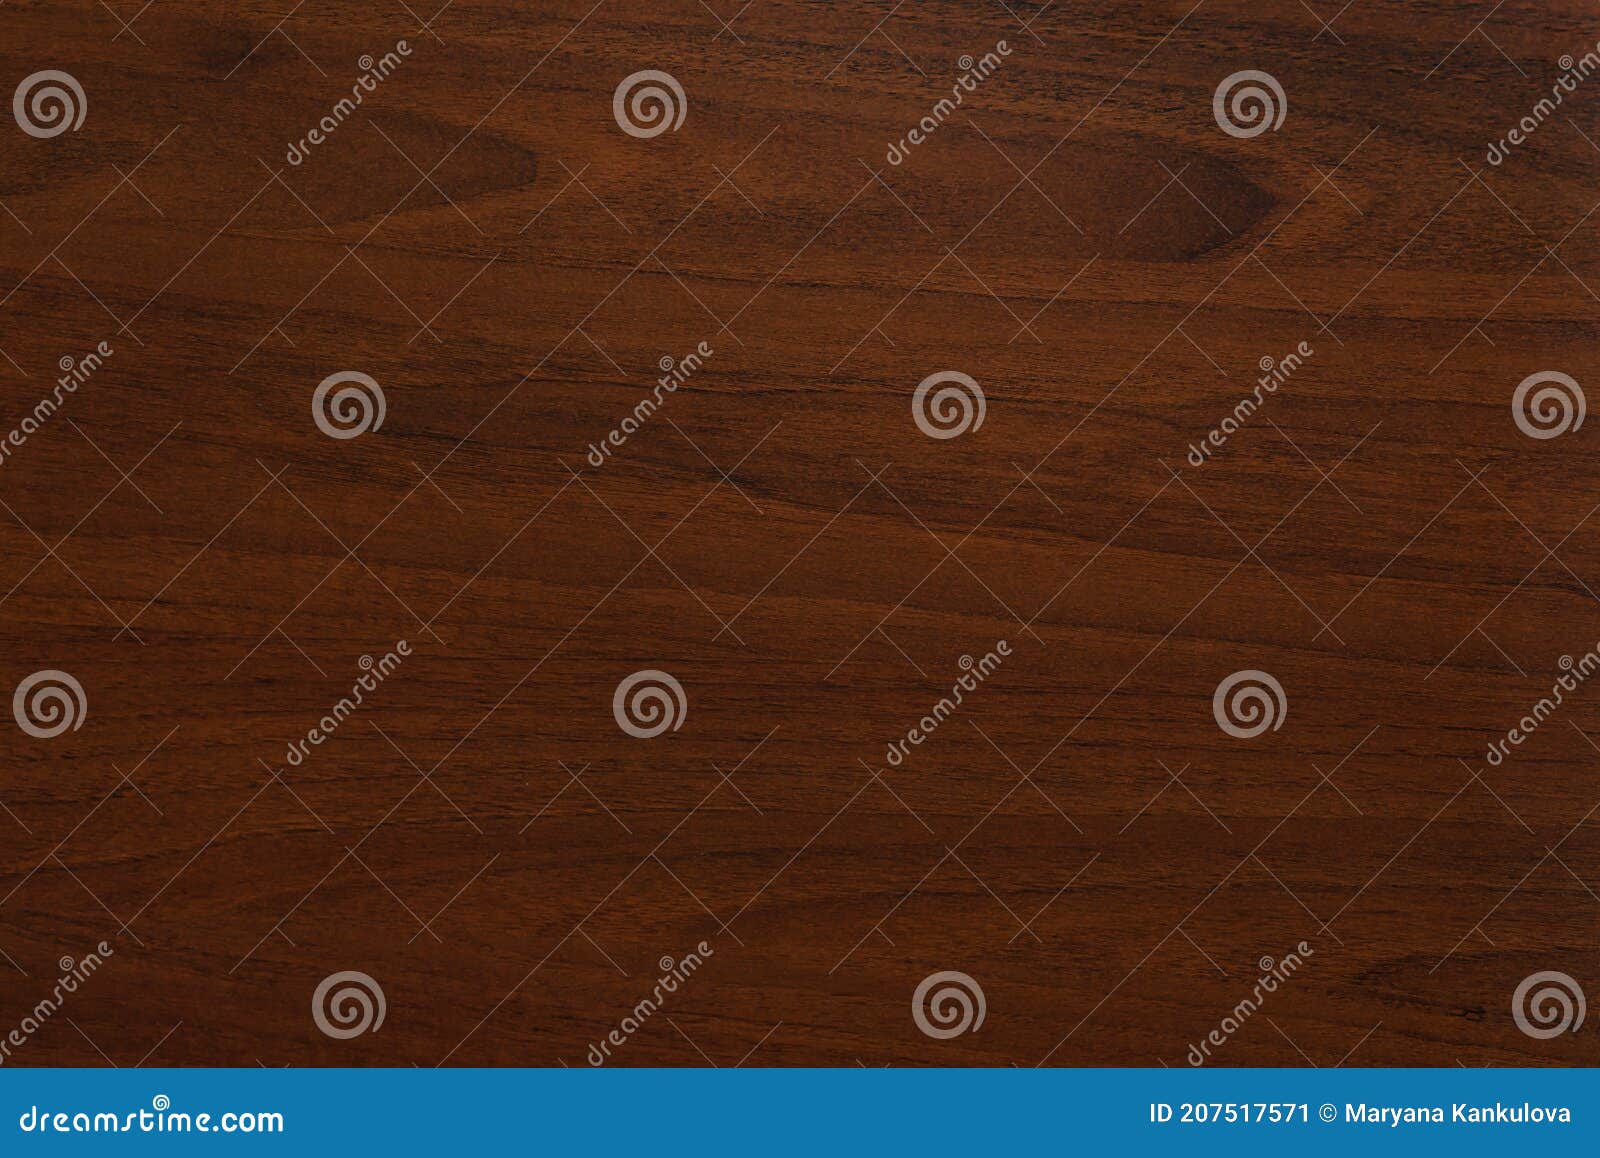 polished wood surface. the background of polished wood texture